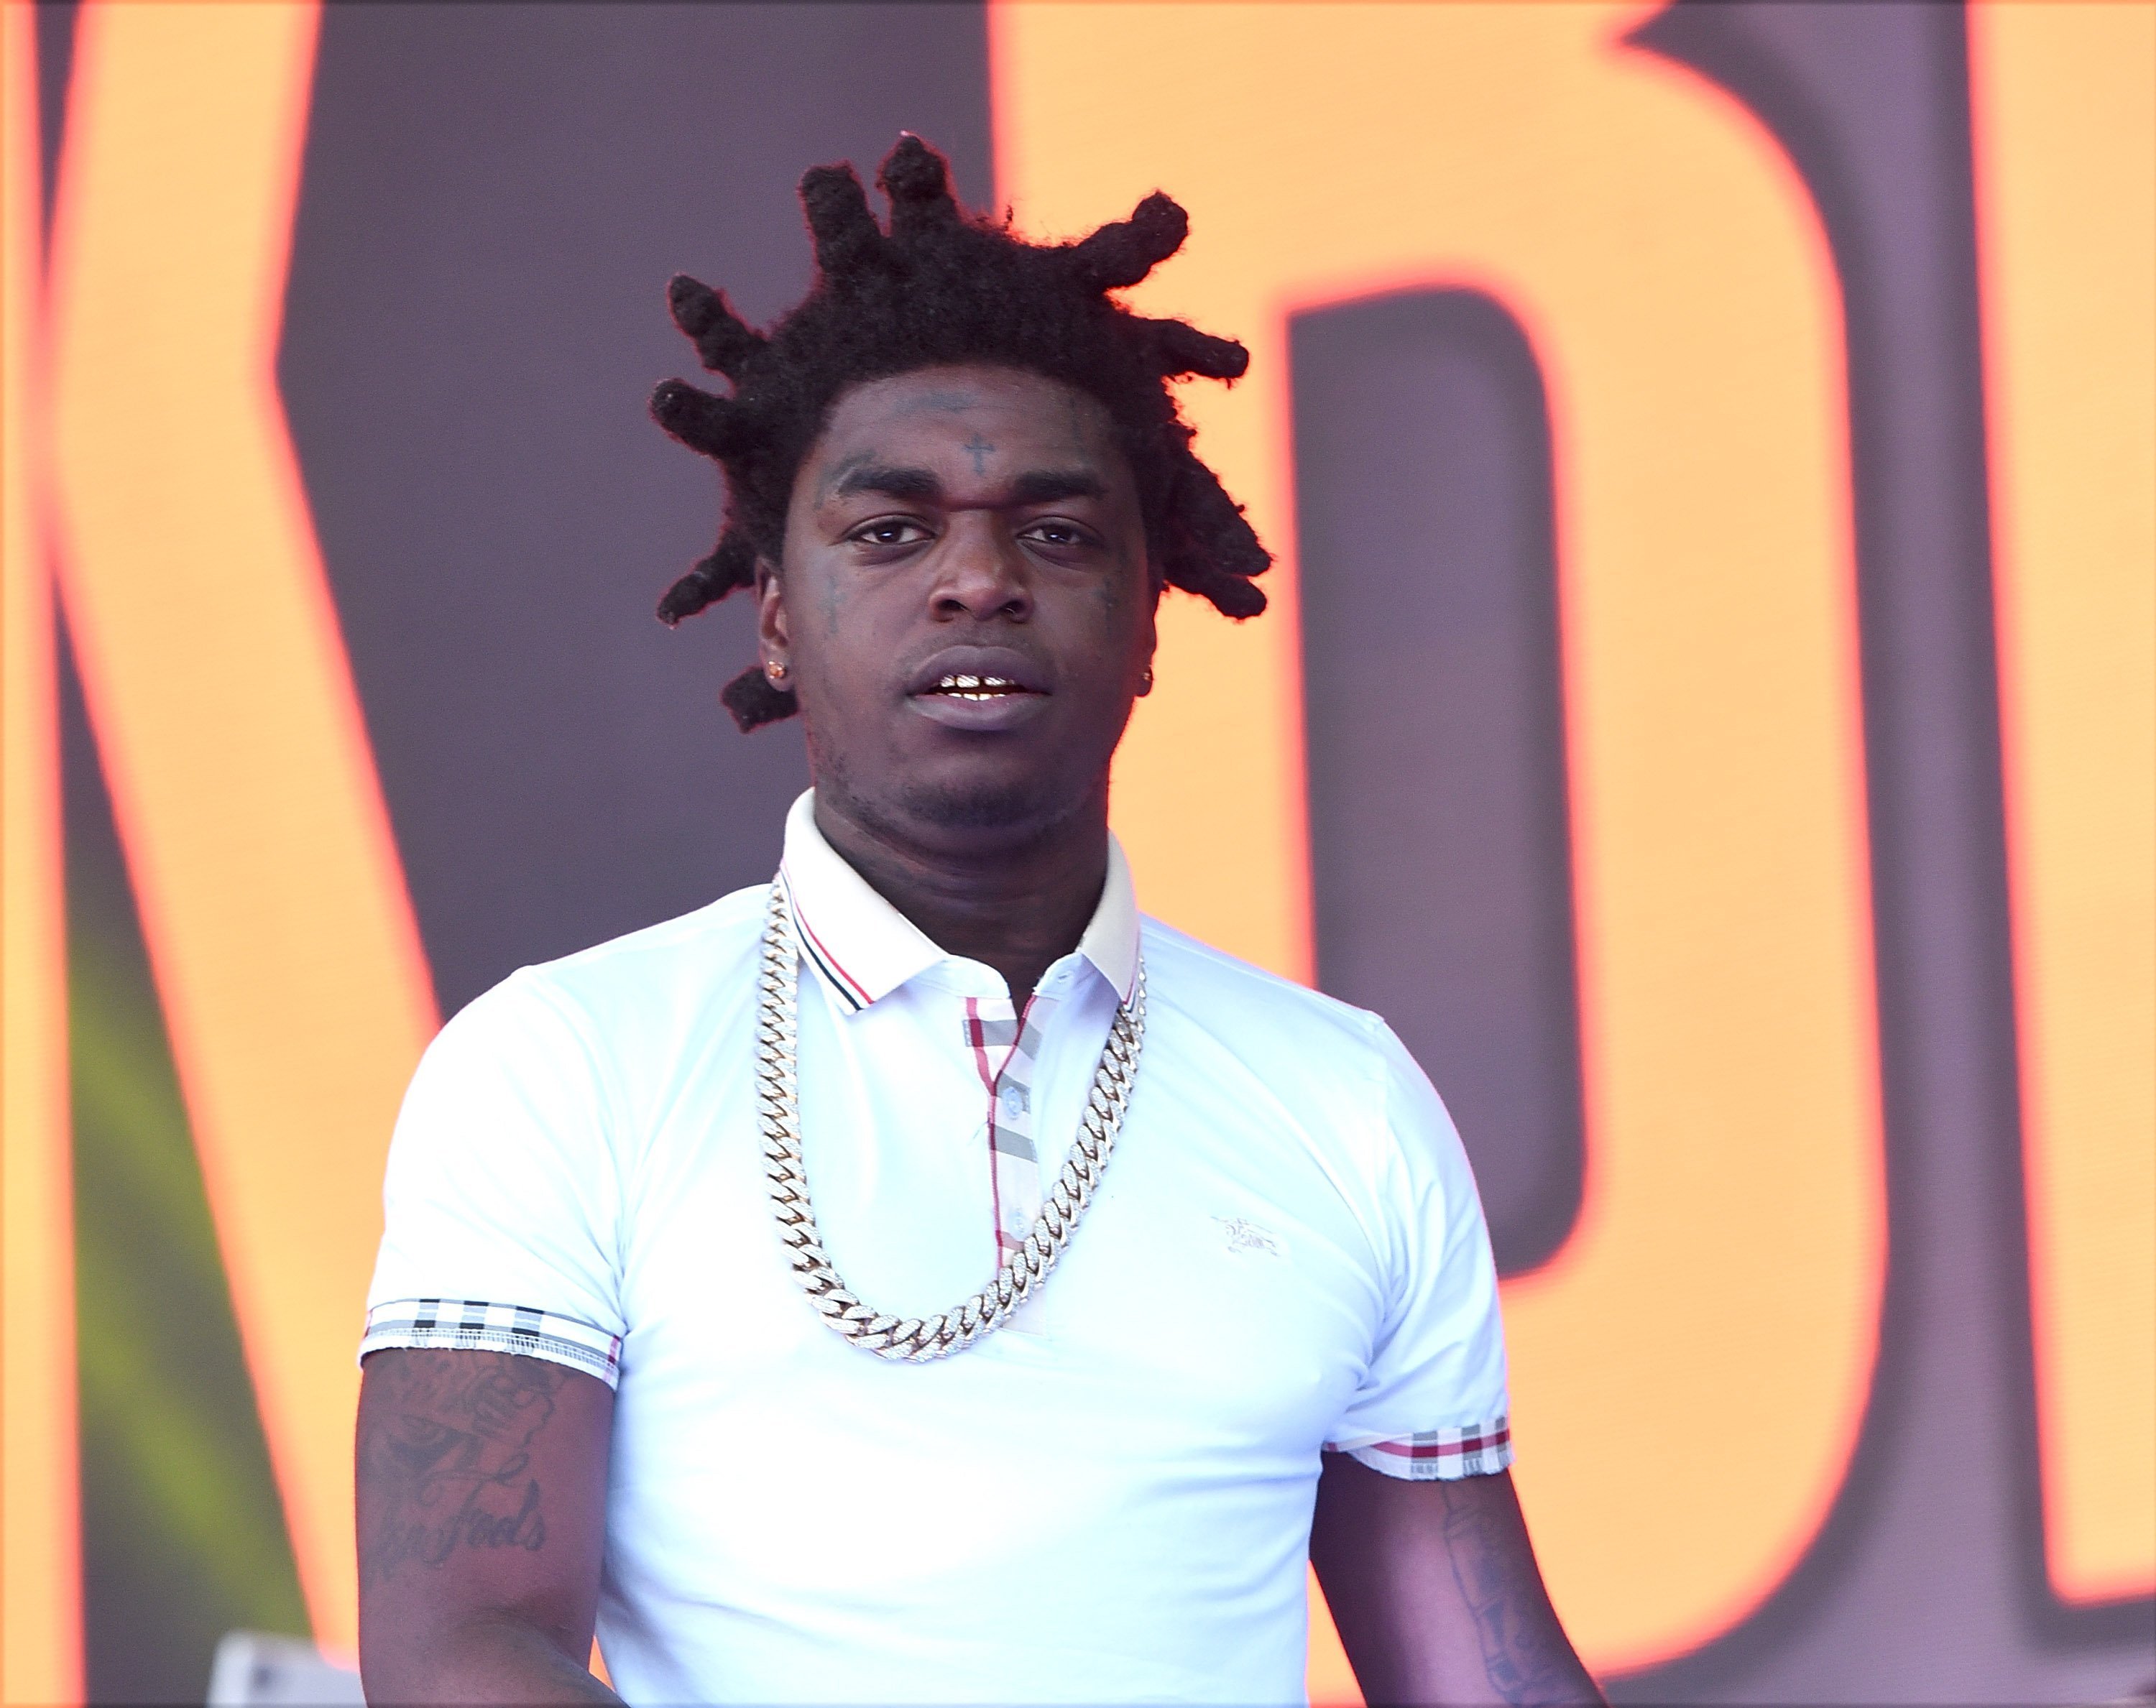 Rapper Kodak Black seen backstage at the Rolling Loud Festival in California in October 2017. | Photo: Getty Images